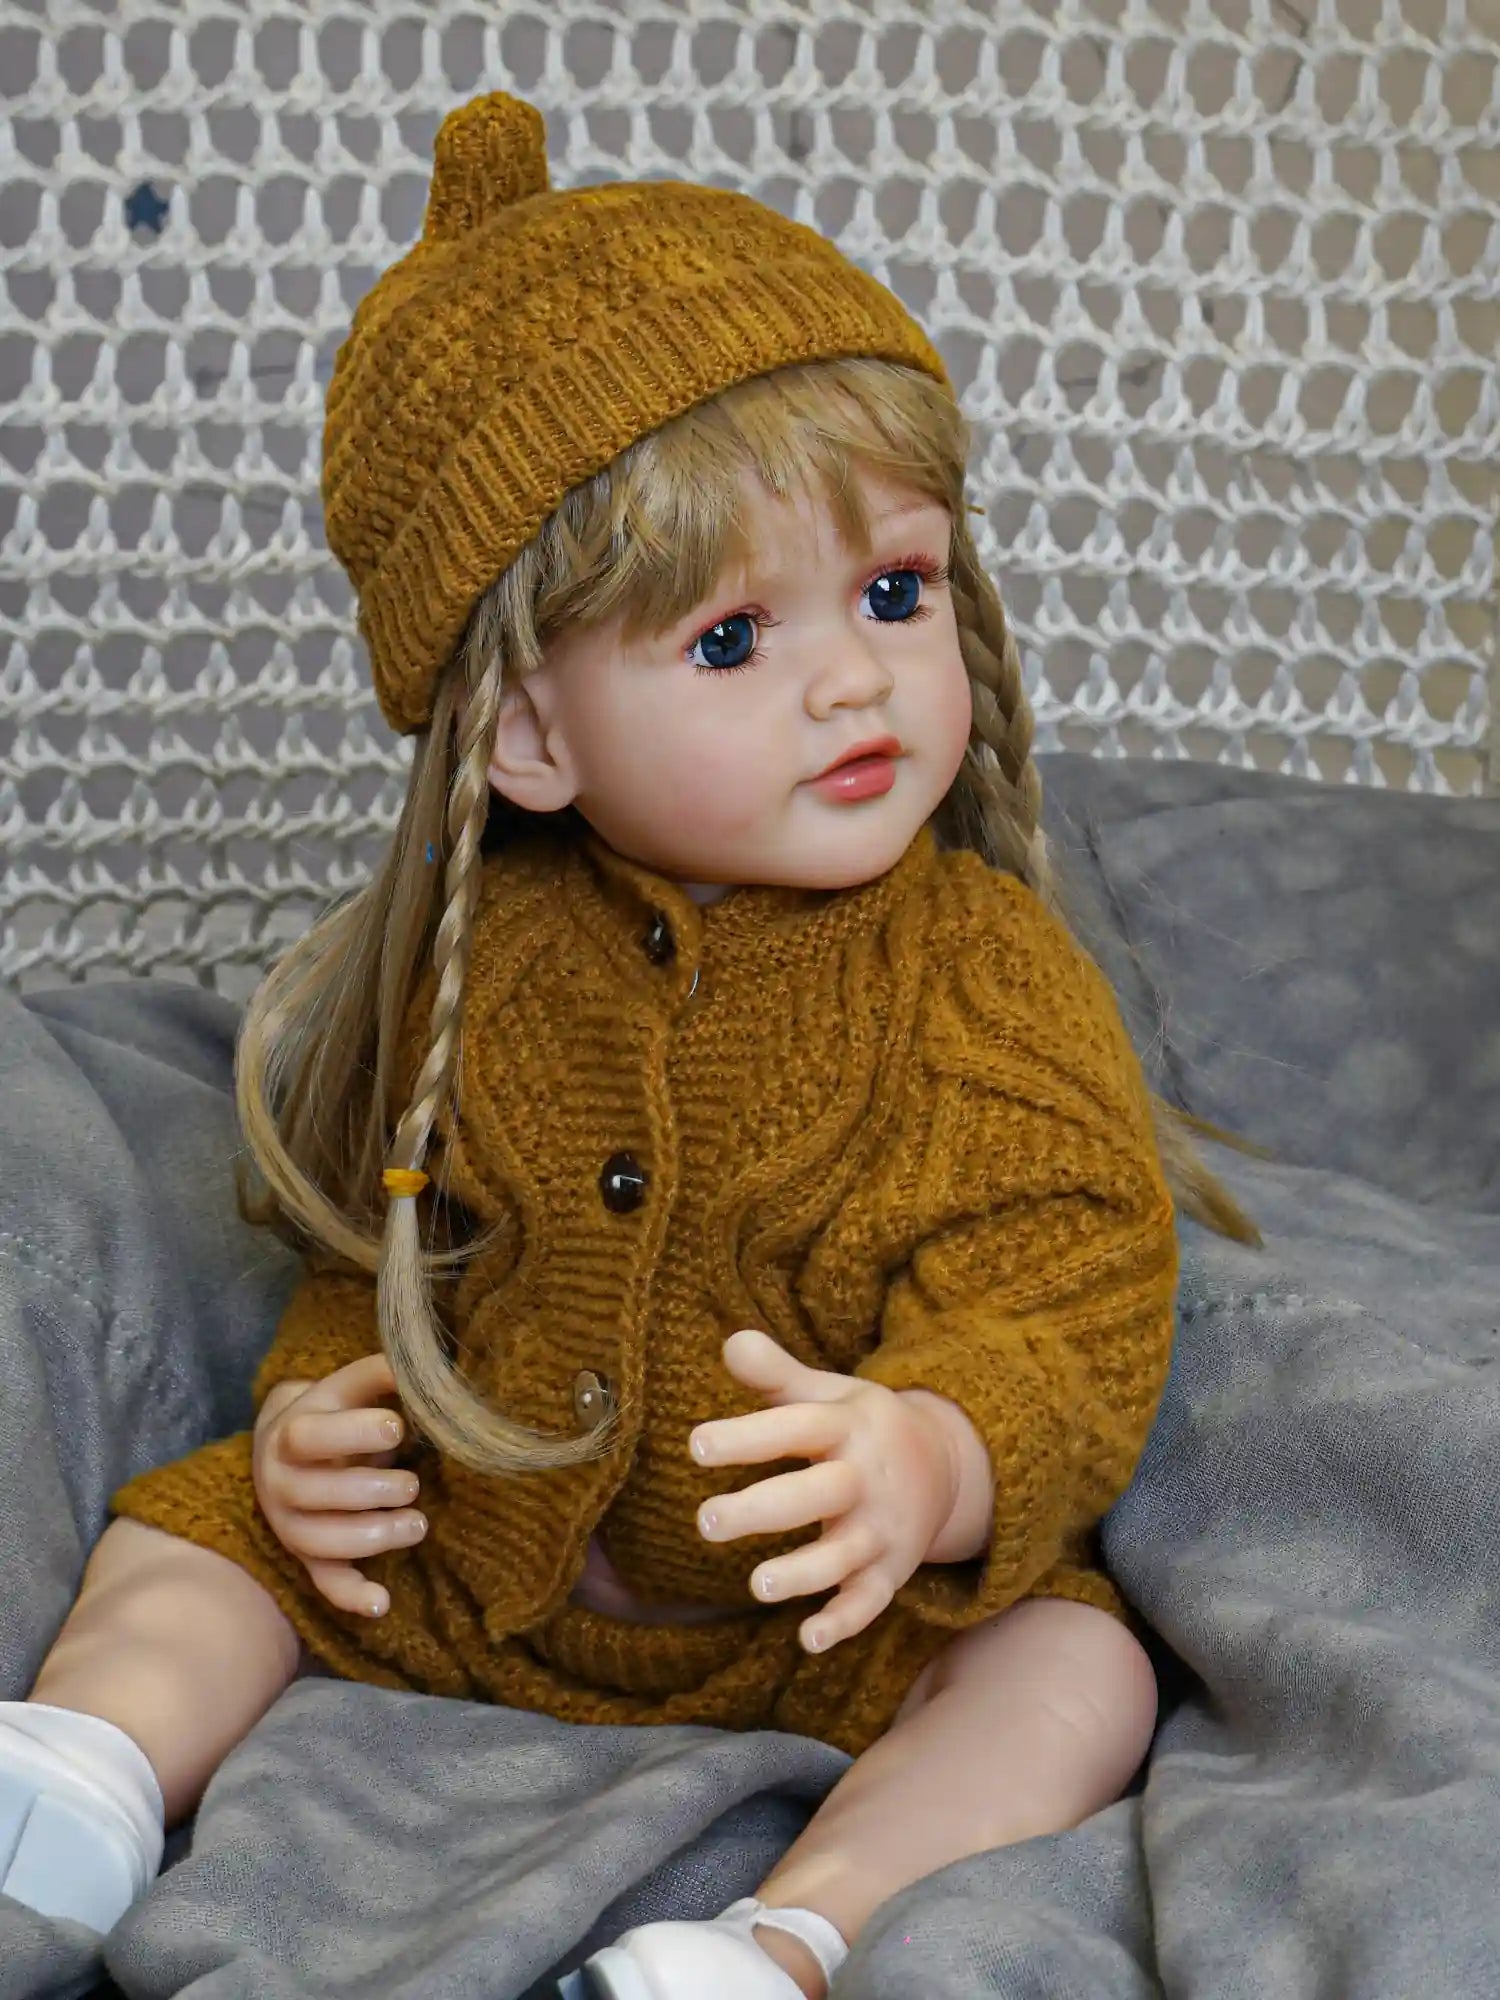 Detailed toddler doll in a relaxed seated position, featuring long blonde hair with braids and expressive blue eyes, dressed in a warm winter outfit of knitted mustard yarn.